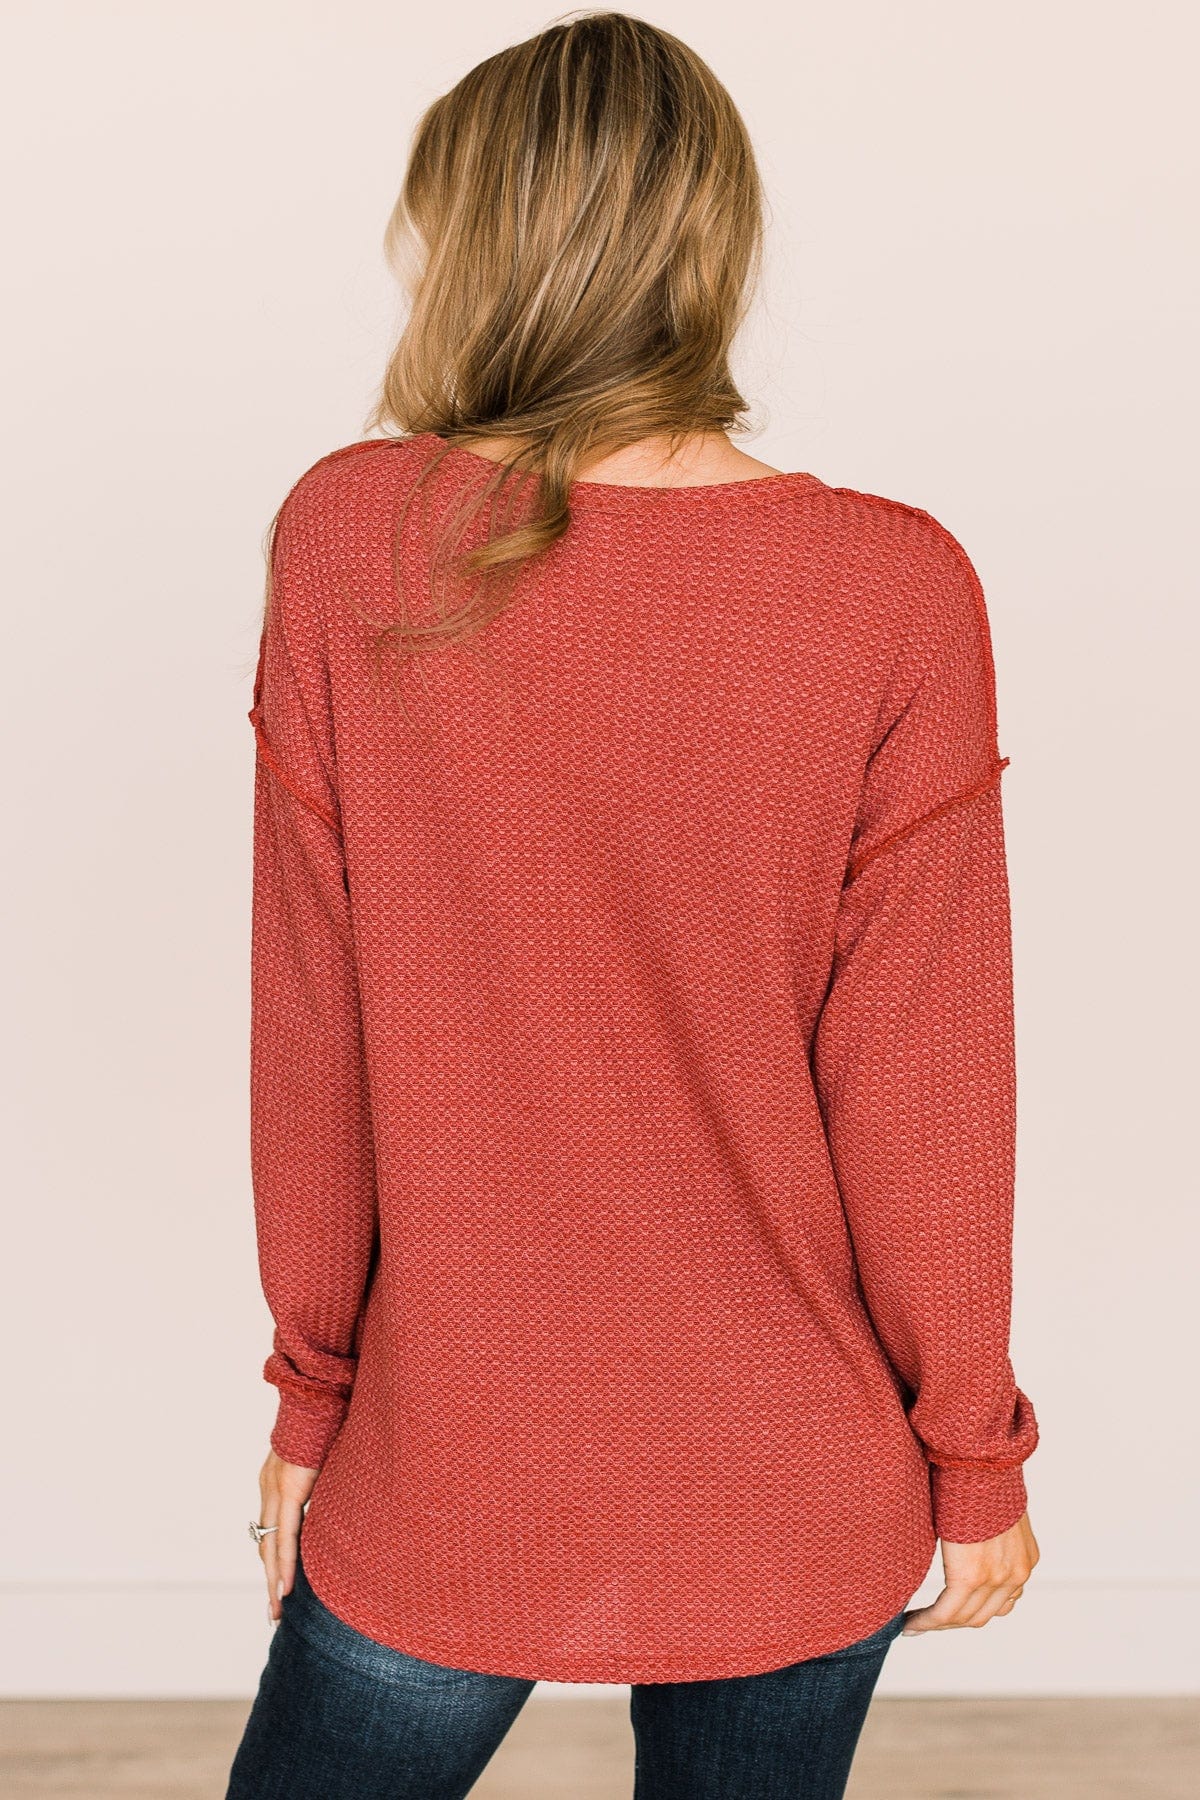 Yours To Hold Knit Top- Rust